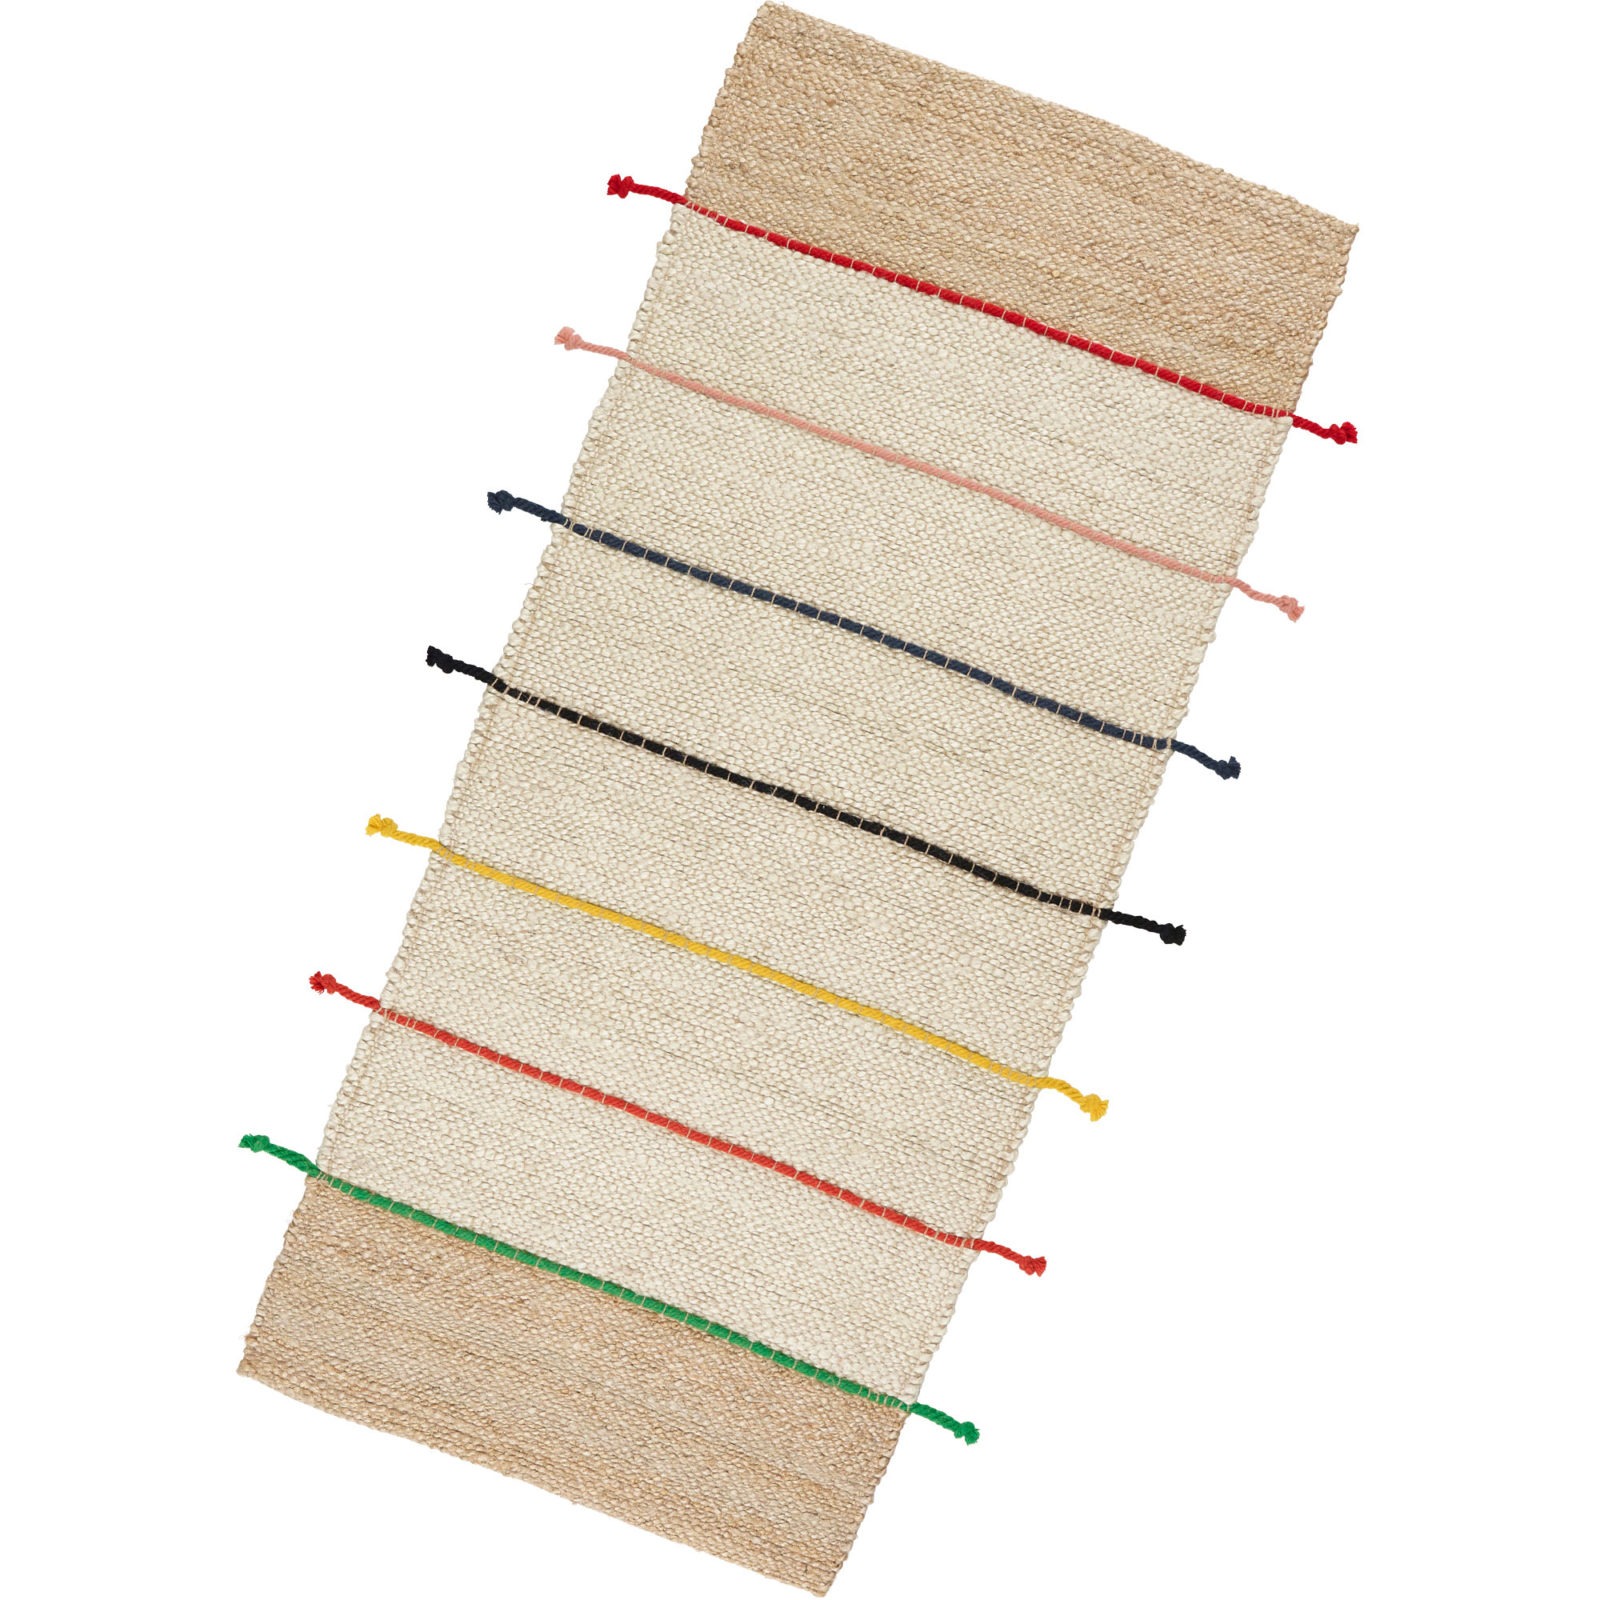 Handmade rectangular sisal rug, beige with stripes made with colourful threads, TILST.